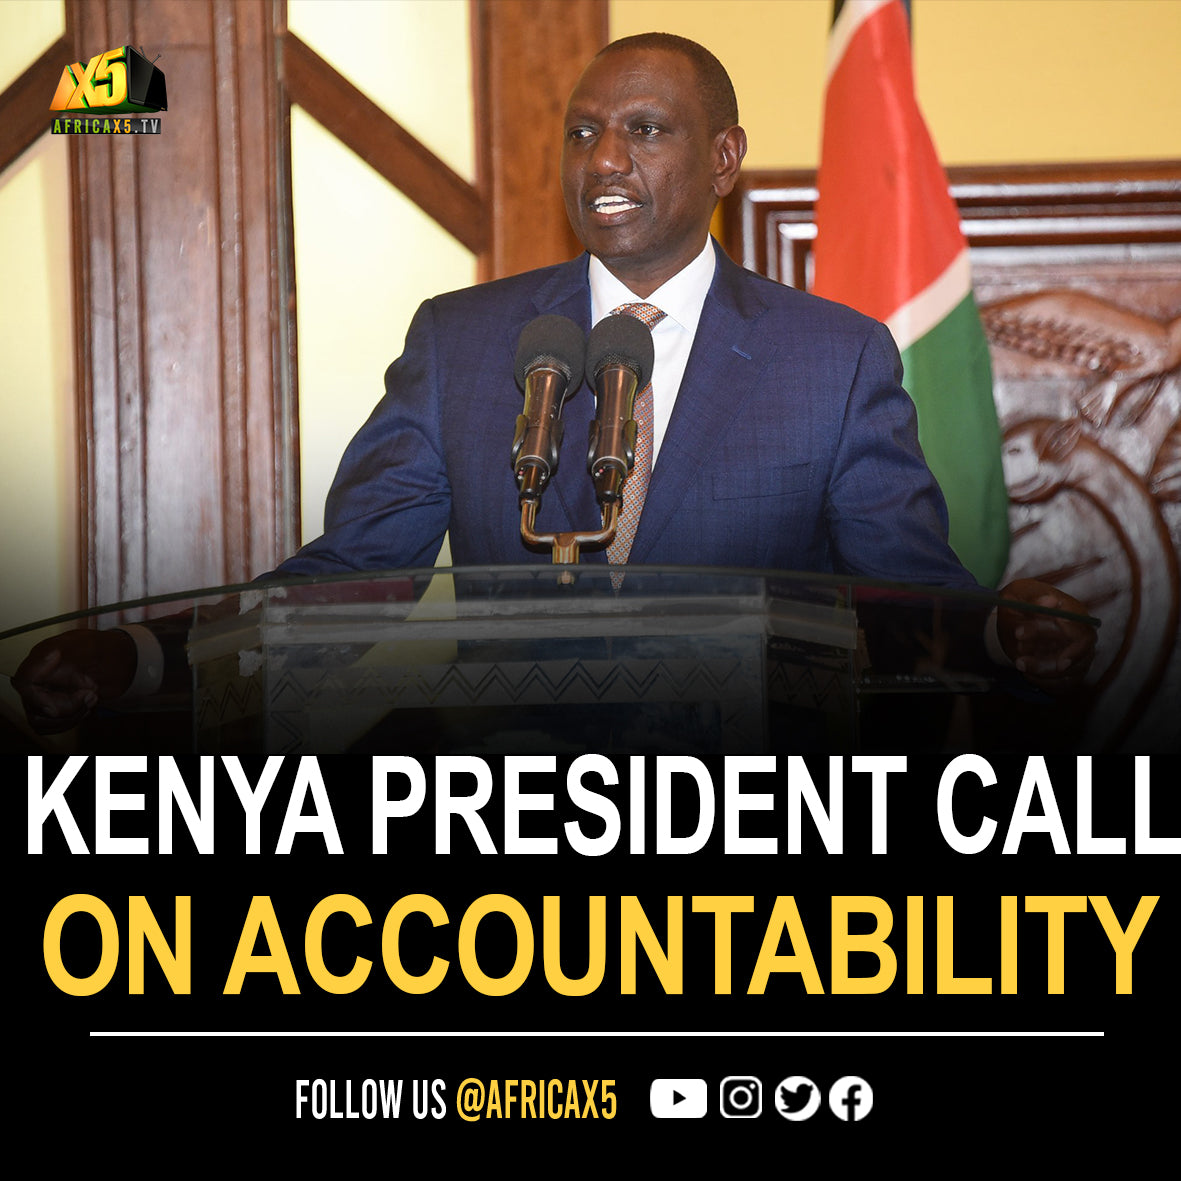 Kenyan President William Ruto called Sunday (Feb. 19) for rich countries to be held accountable for driving global warming and for a revamp of international financial institutions to better fight climate change.